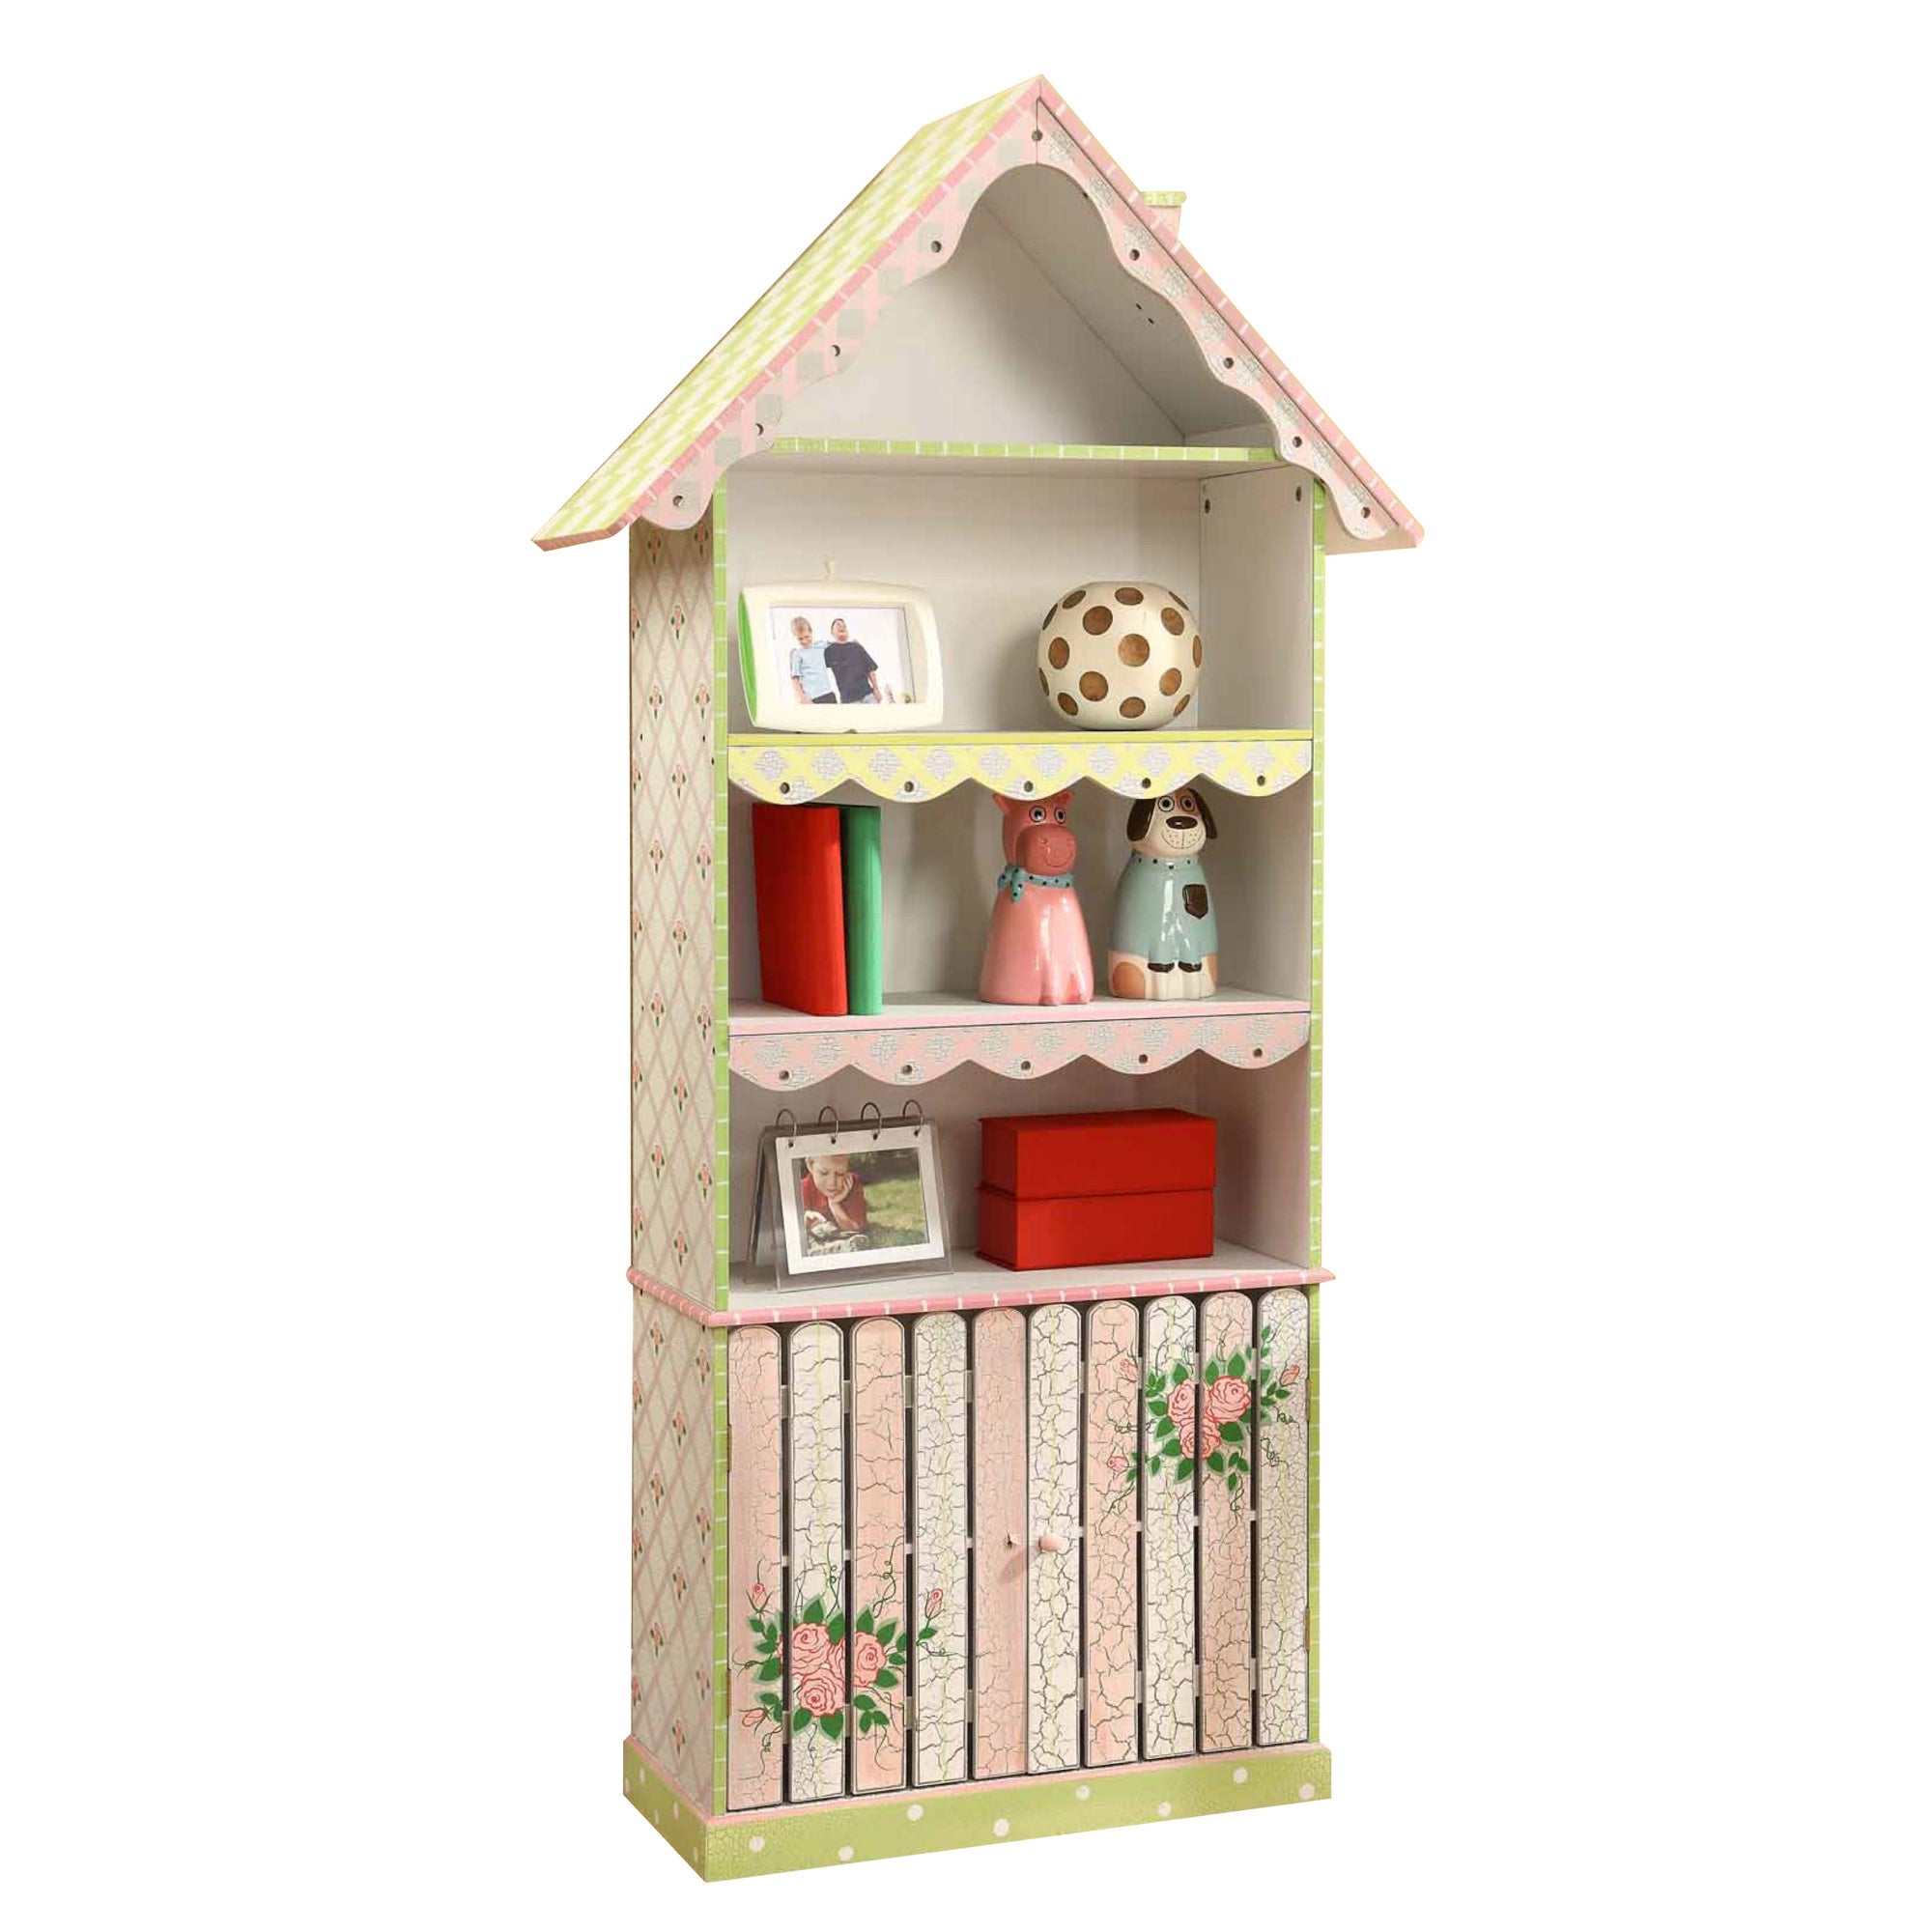 Fantasy Fields Kids Painted Wooden Crackled Rose Bookshelf House with Cabinet, Pink